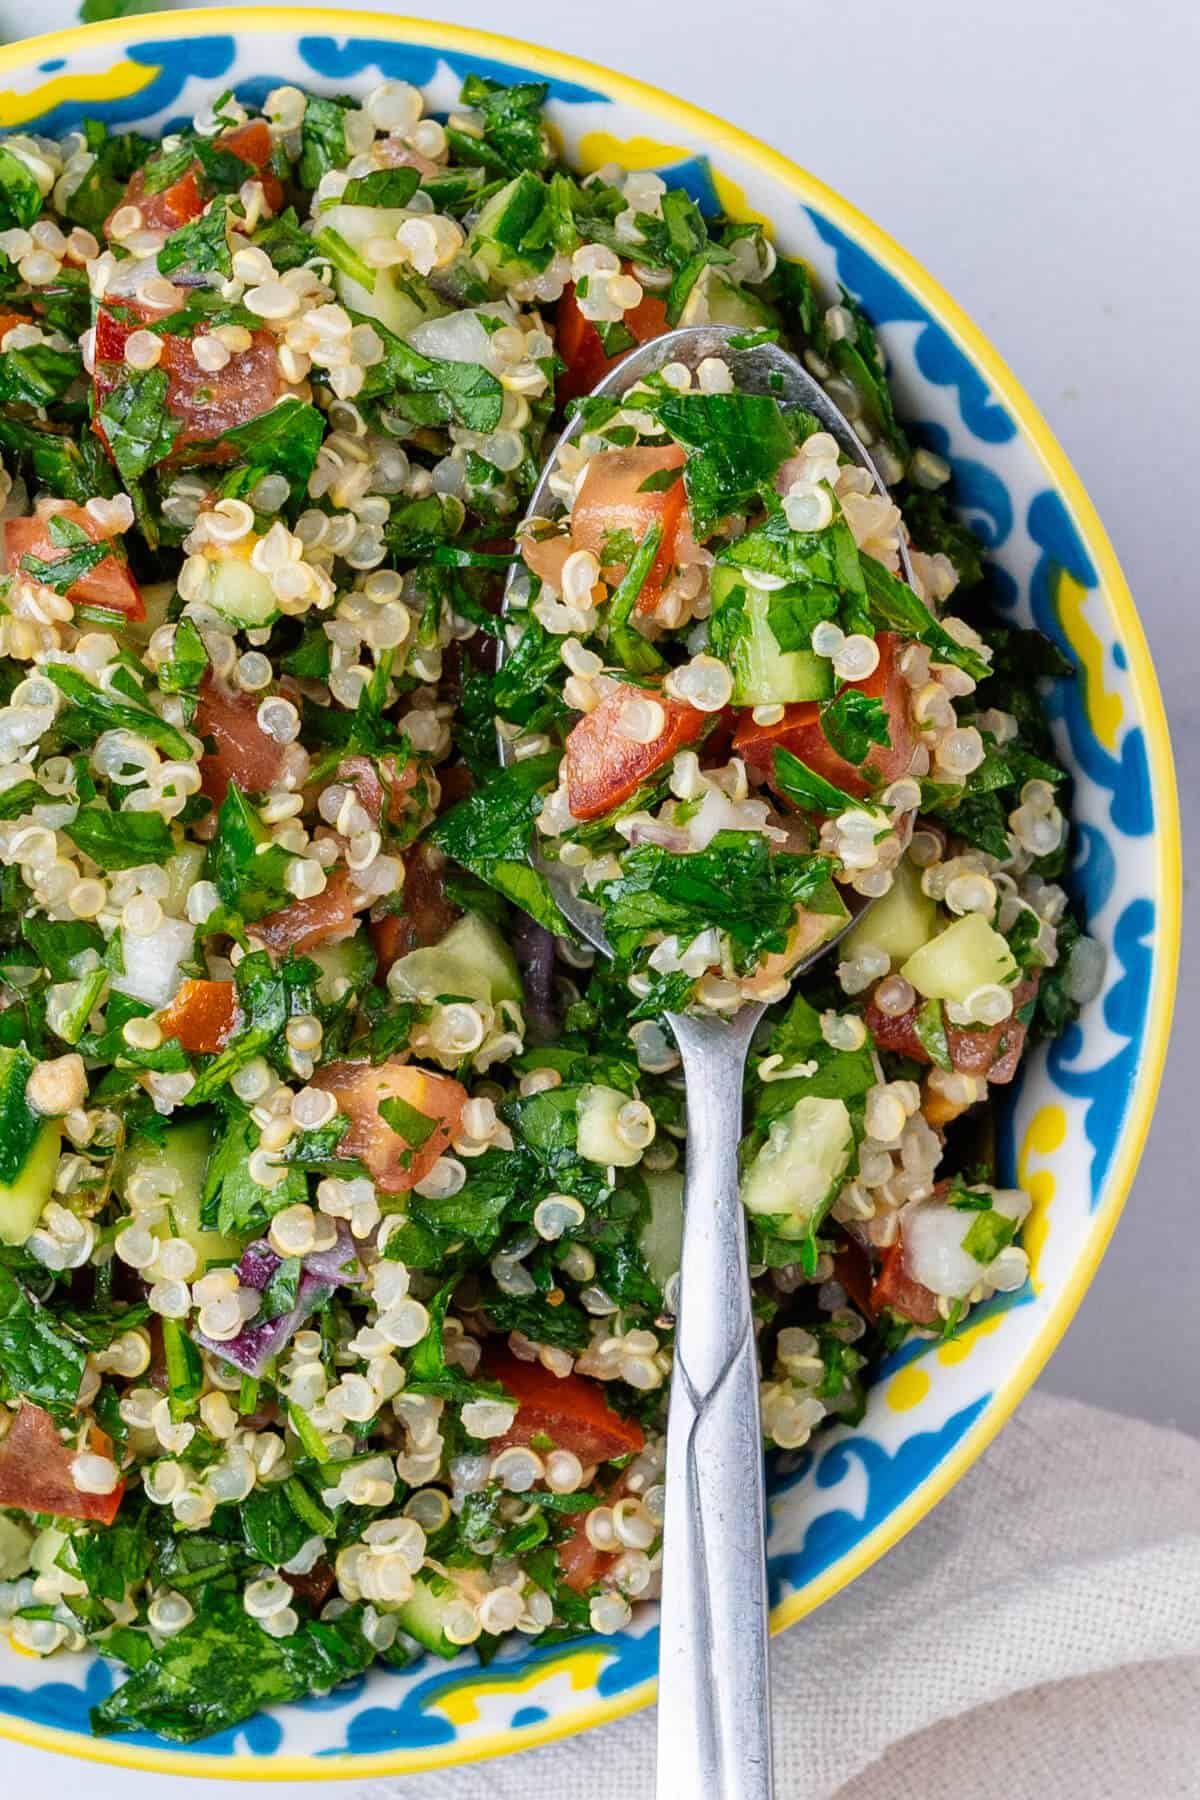 Spoon in a bowl of Quinoa Tabbouleh salad